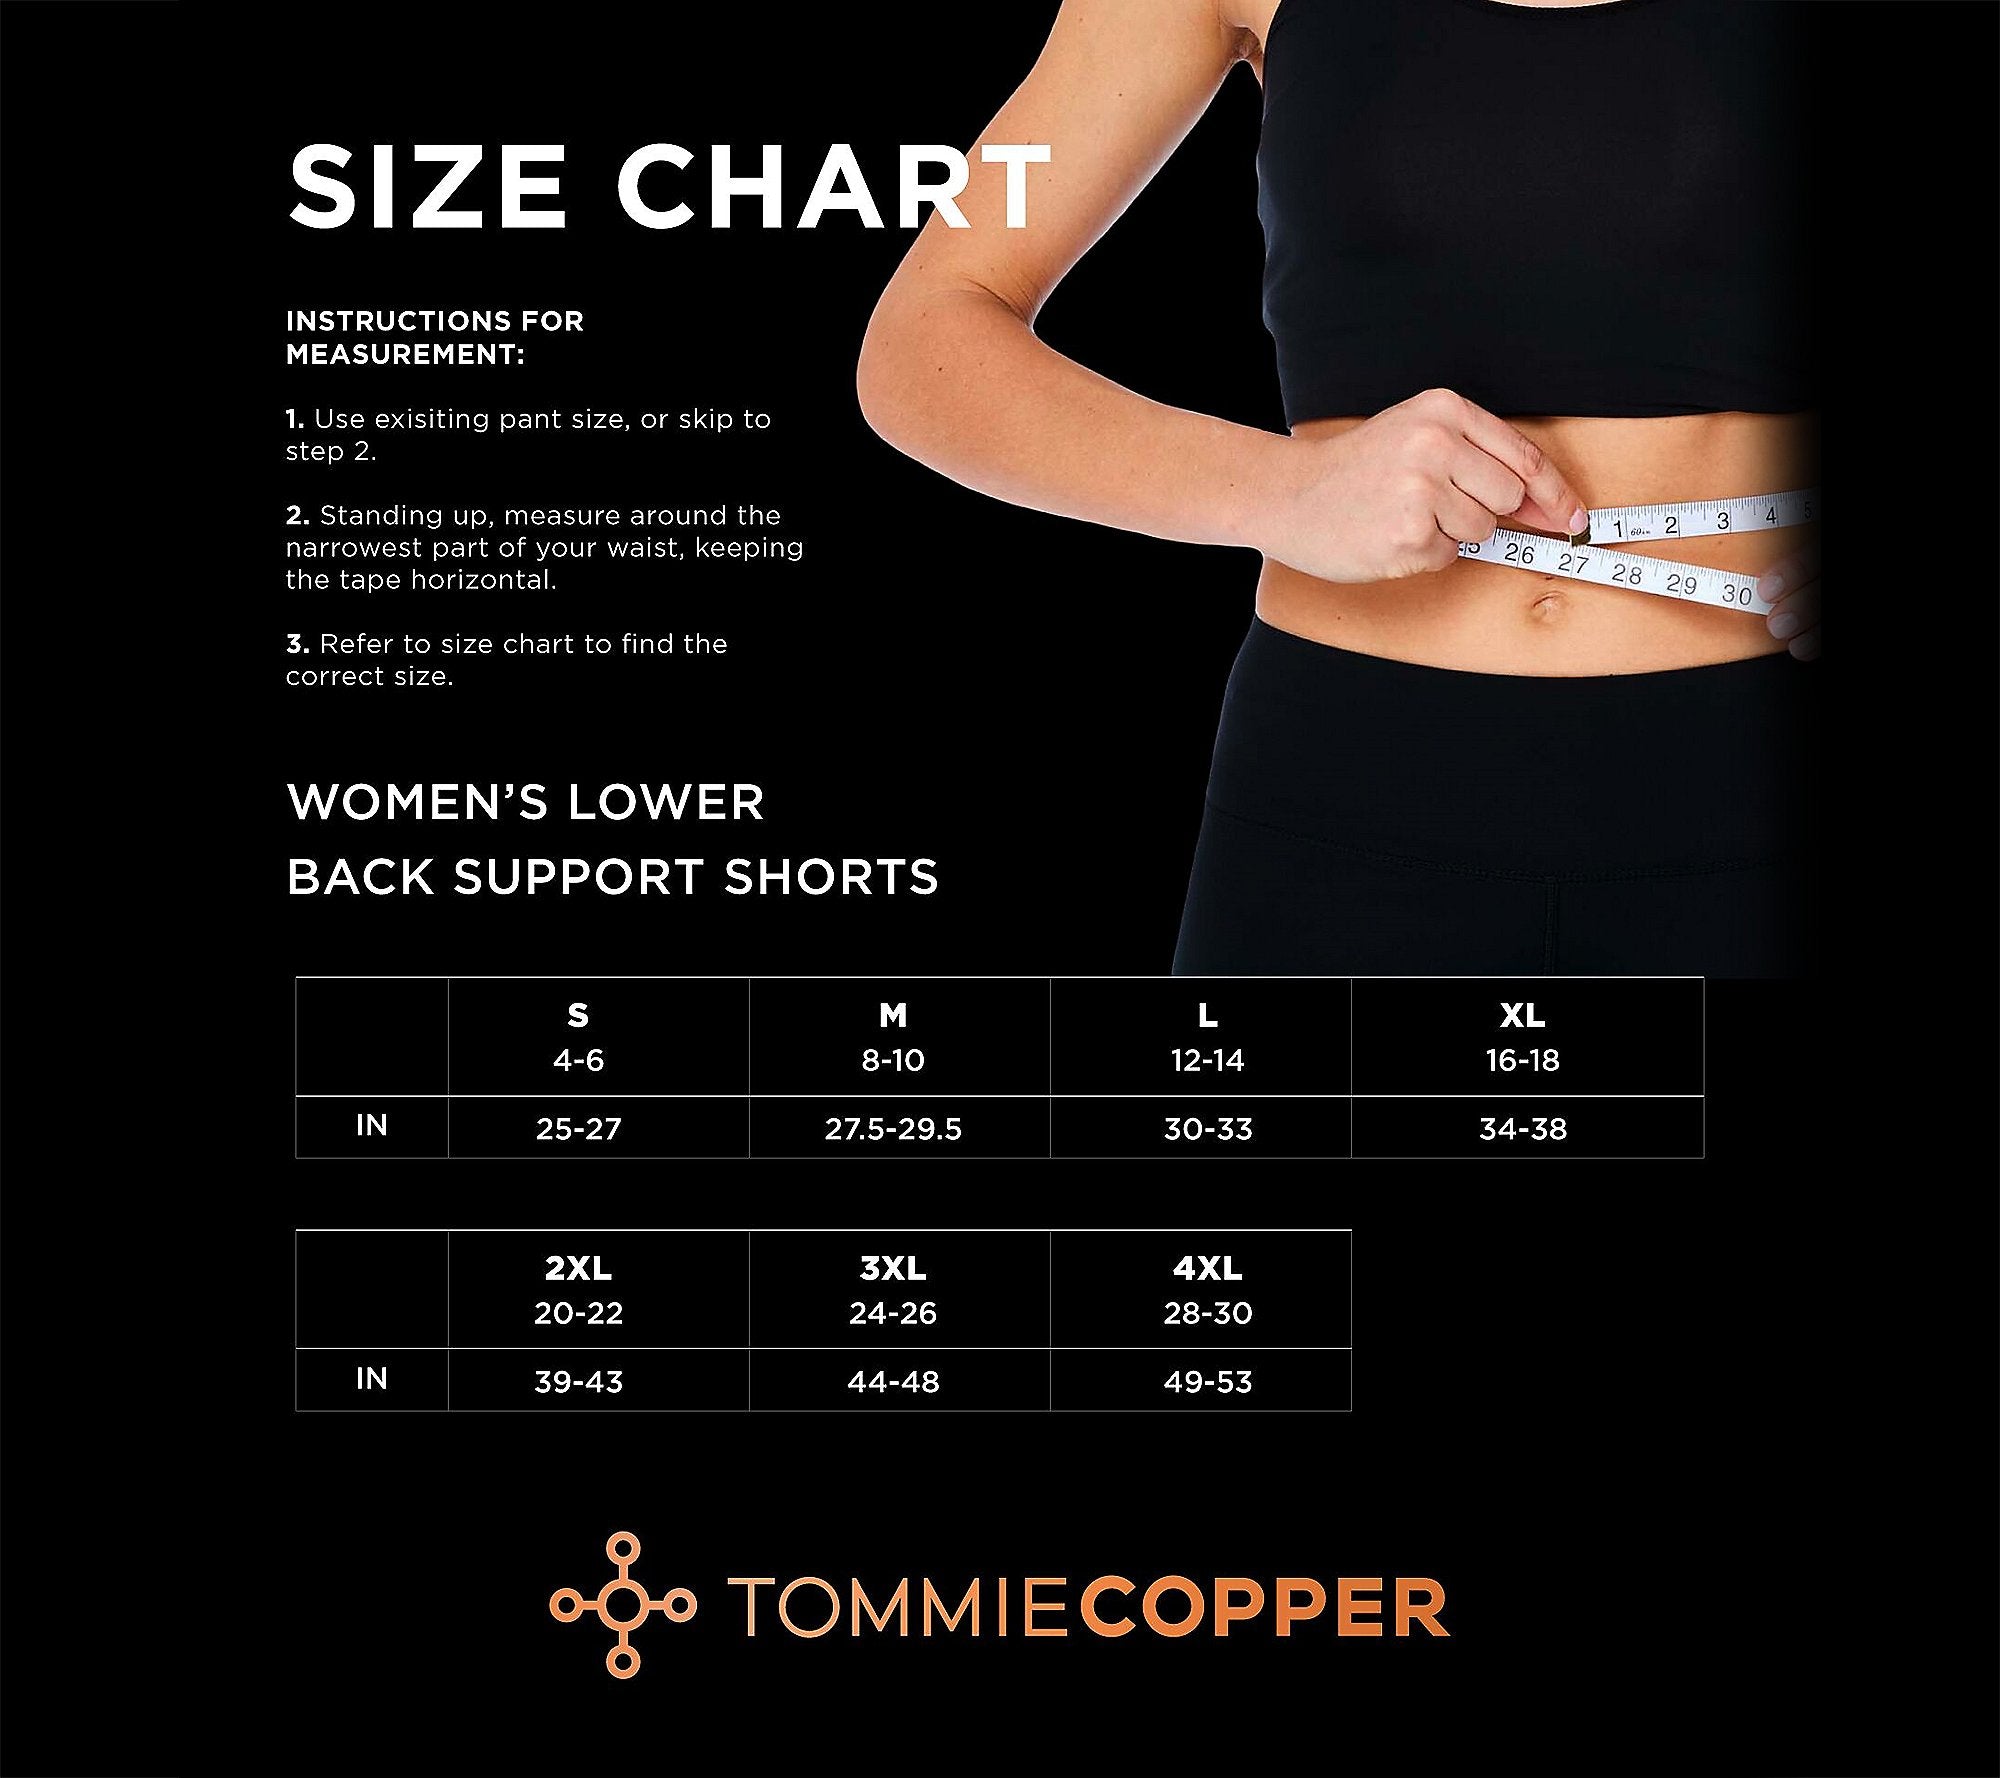 Tommie Copper Women's Lower Back Support Shorts